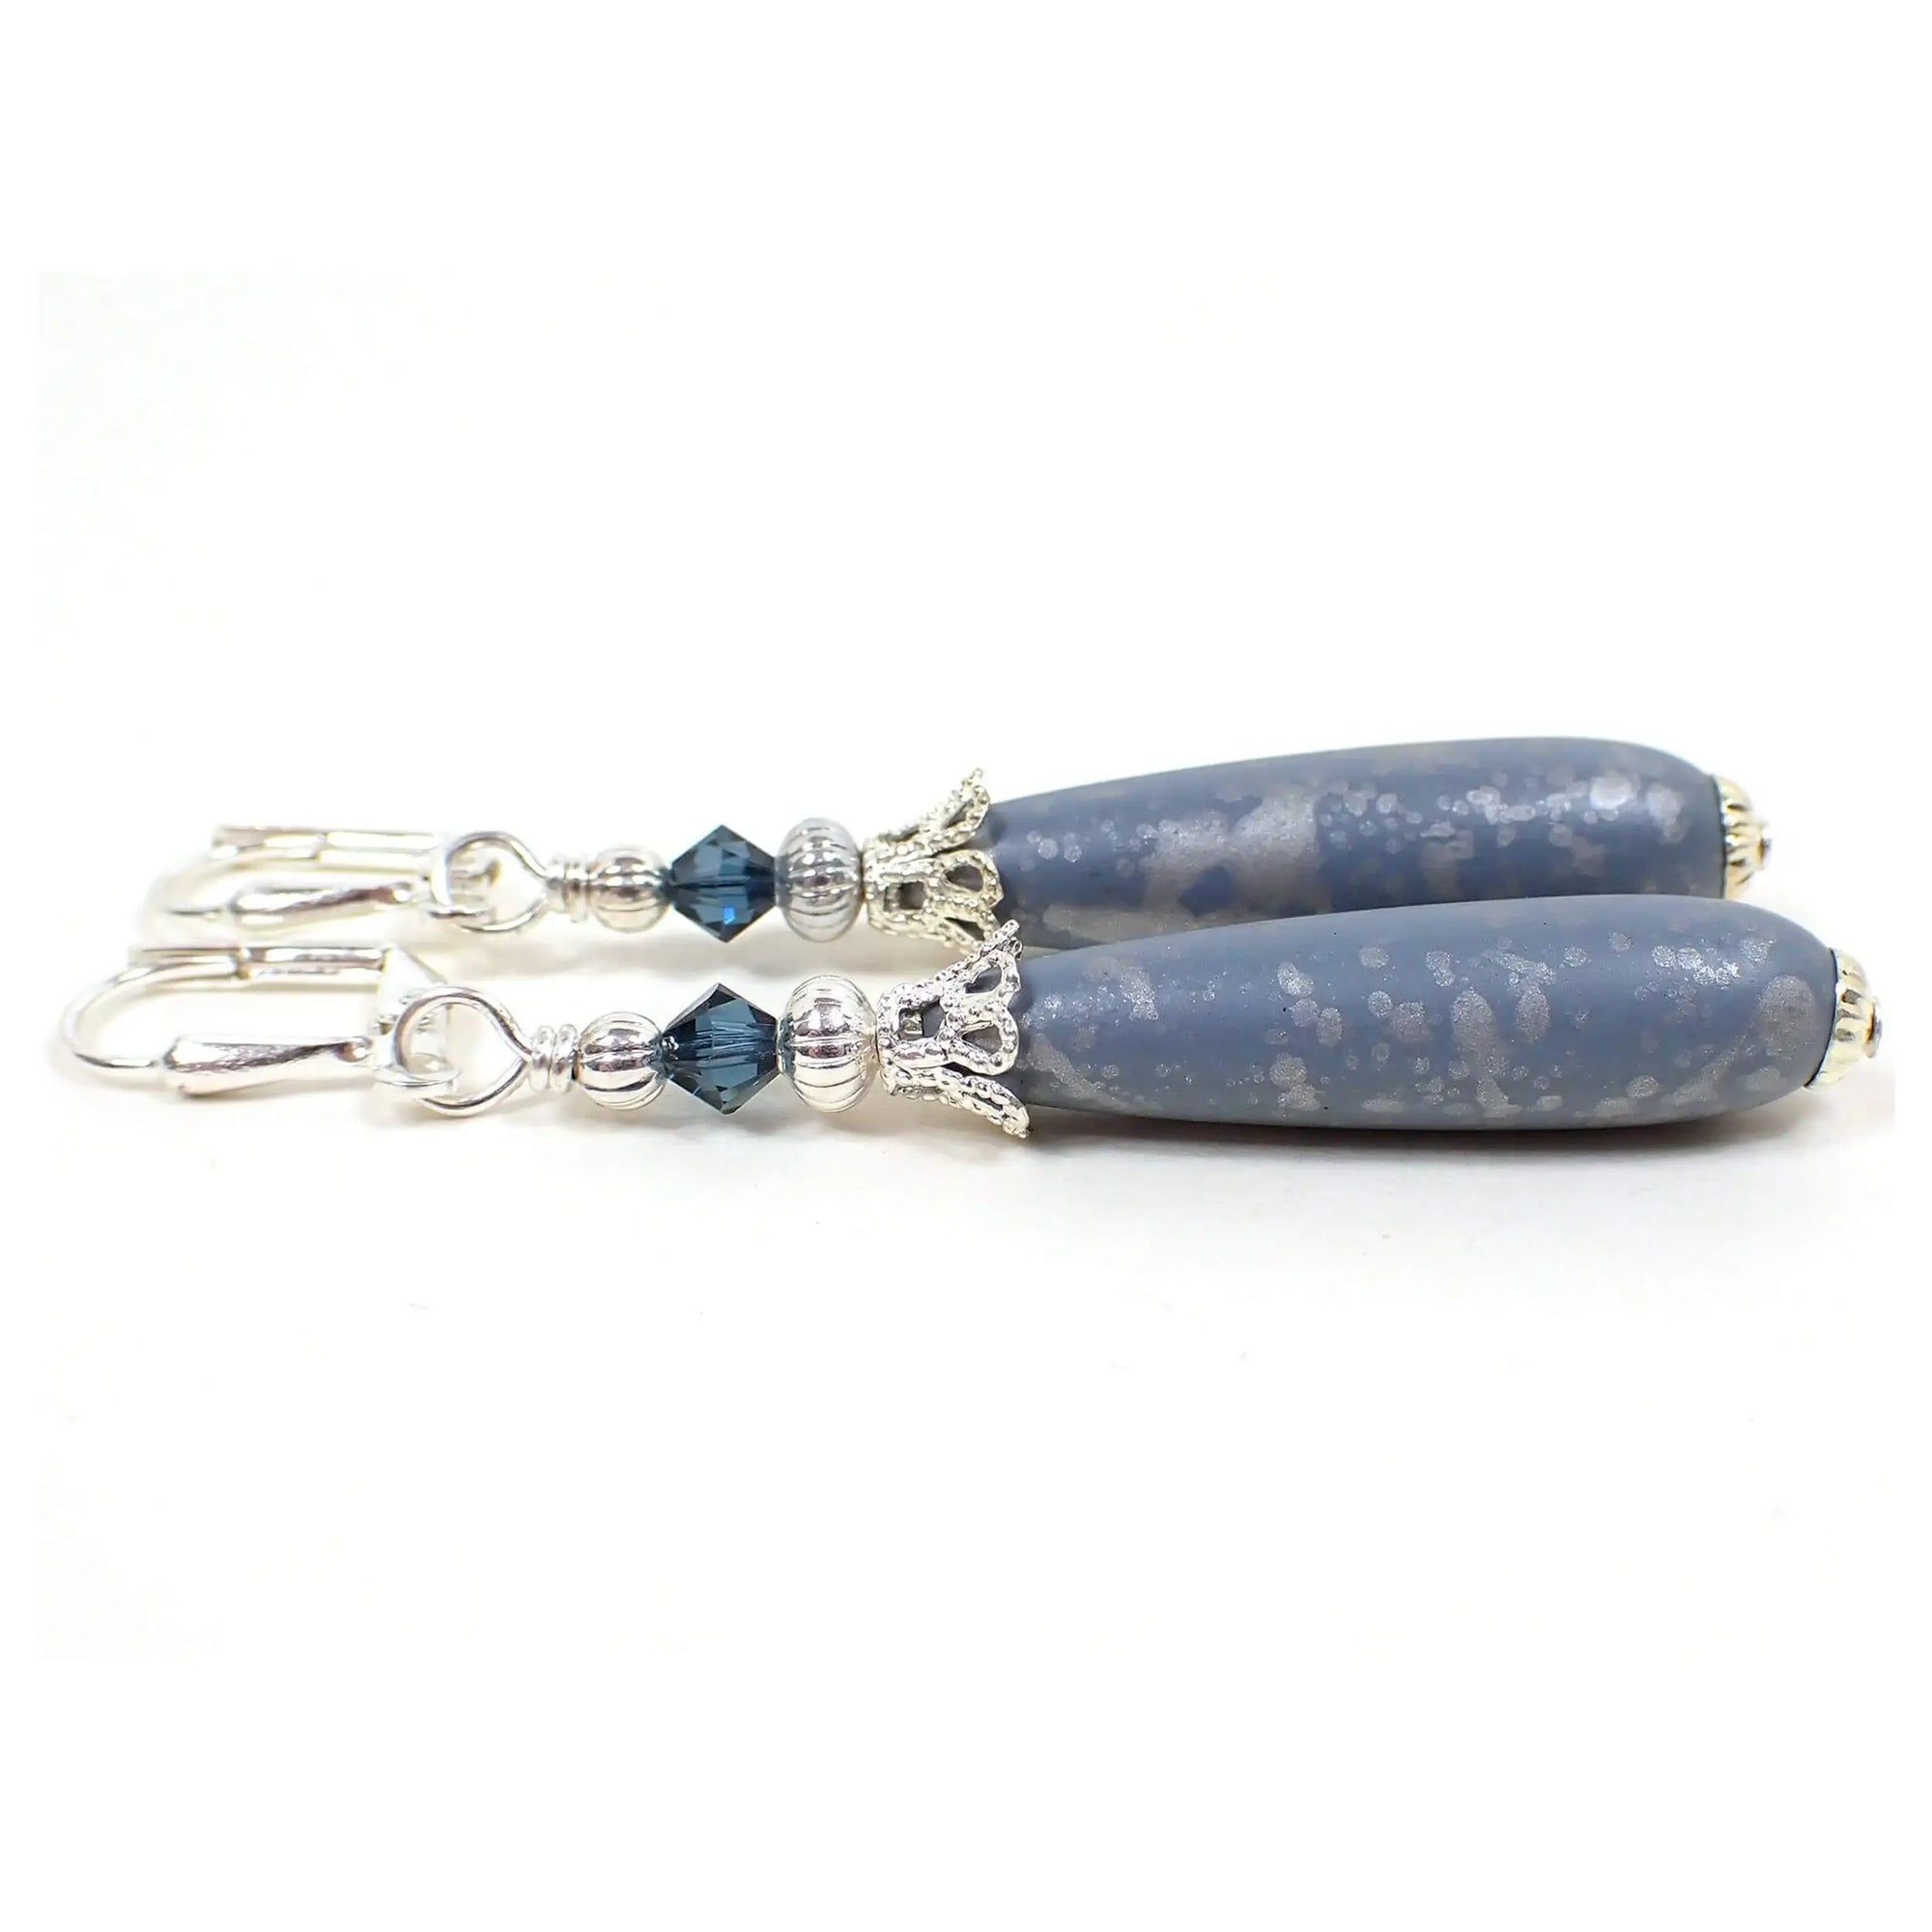 Side view of the handmade teardrop earrings. The metal is silver plated in color. There are blue faceted glass crystal beads on the top. The bottom beads are acrylic and teardrop shaped. They are a light country blue color with a metallic silver splash pattern on them.